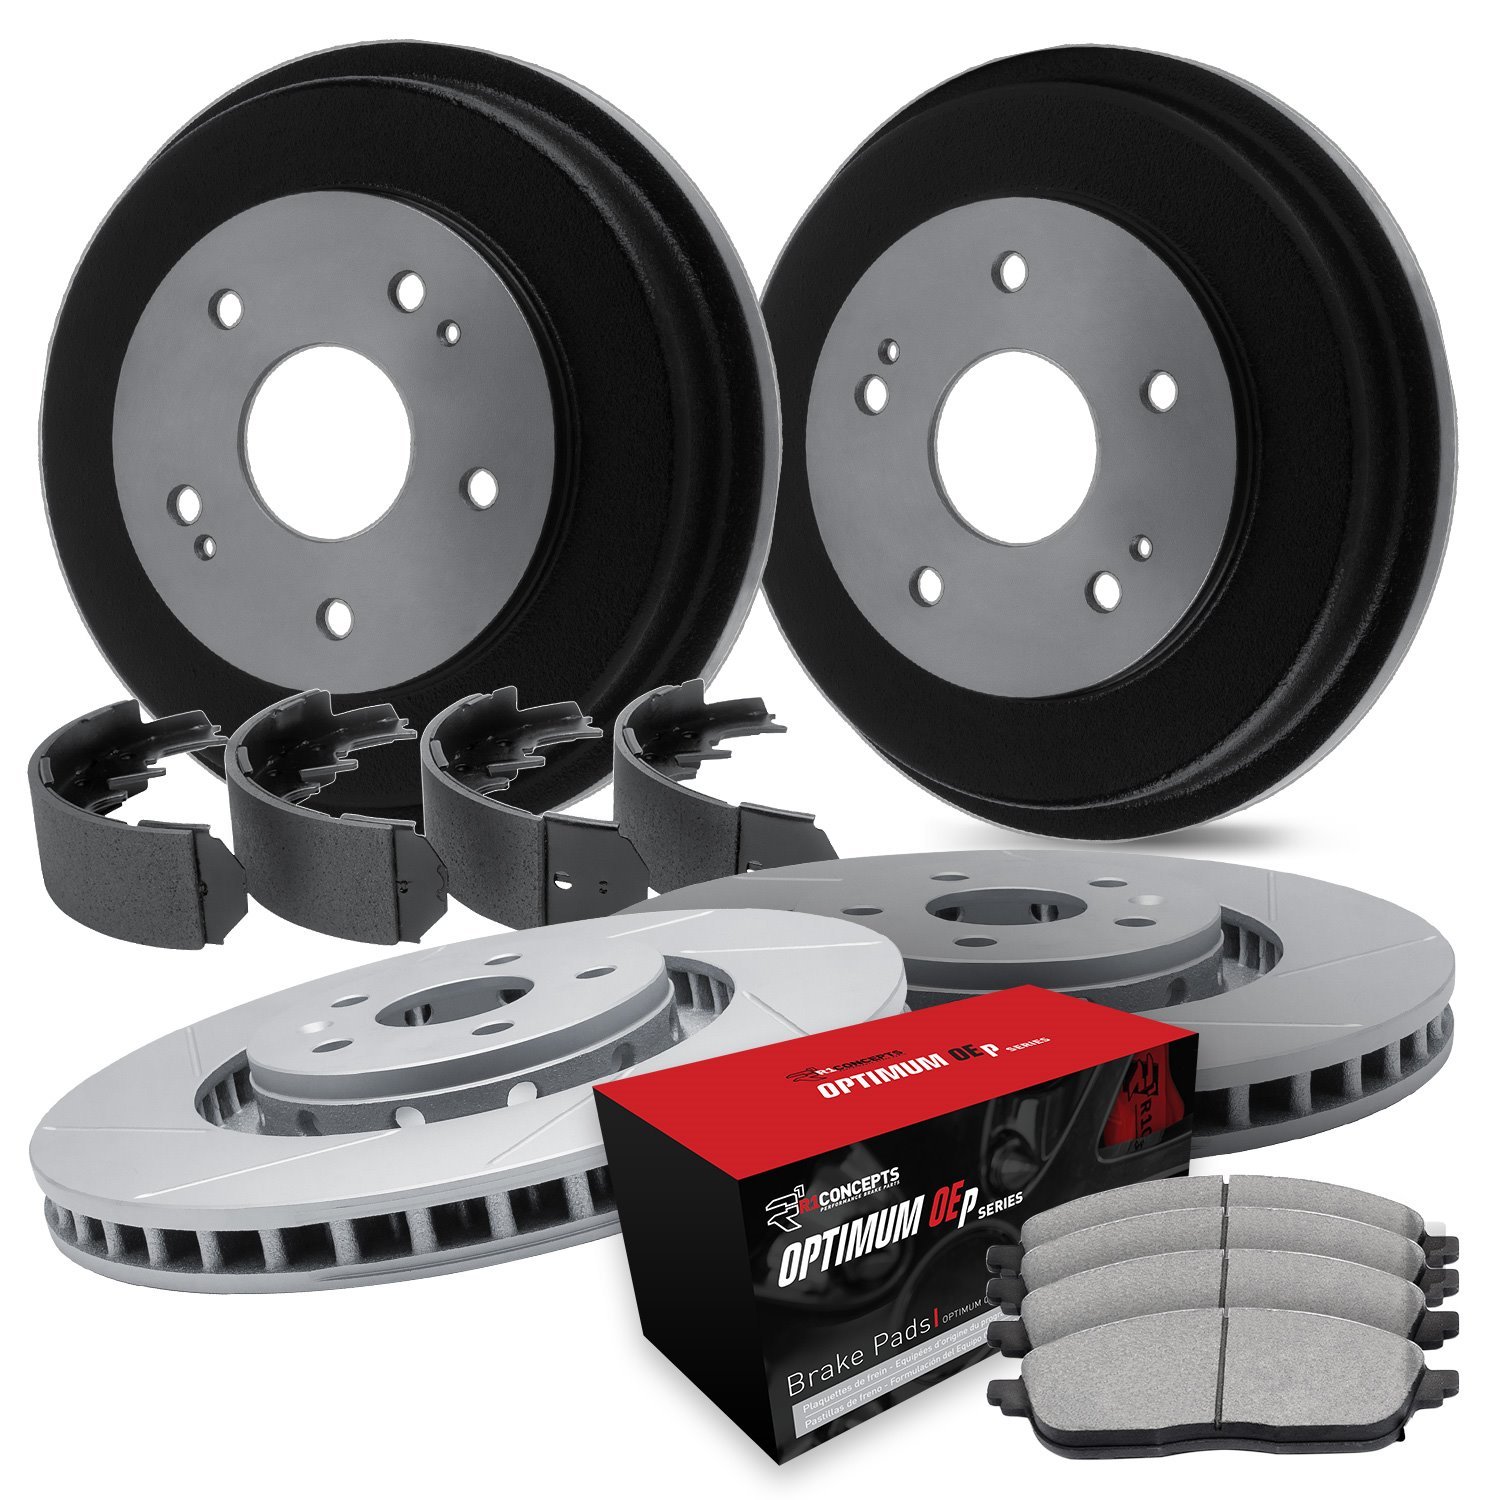 GEO-Carbon Slotted Brake Rotor & Drum Set w/Optimum OE Pads & Shoes, 1998-2003 Lexus/Toyota/Scion, Position: Front & Rear